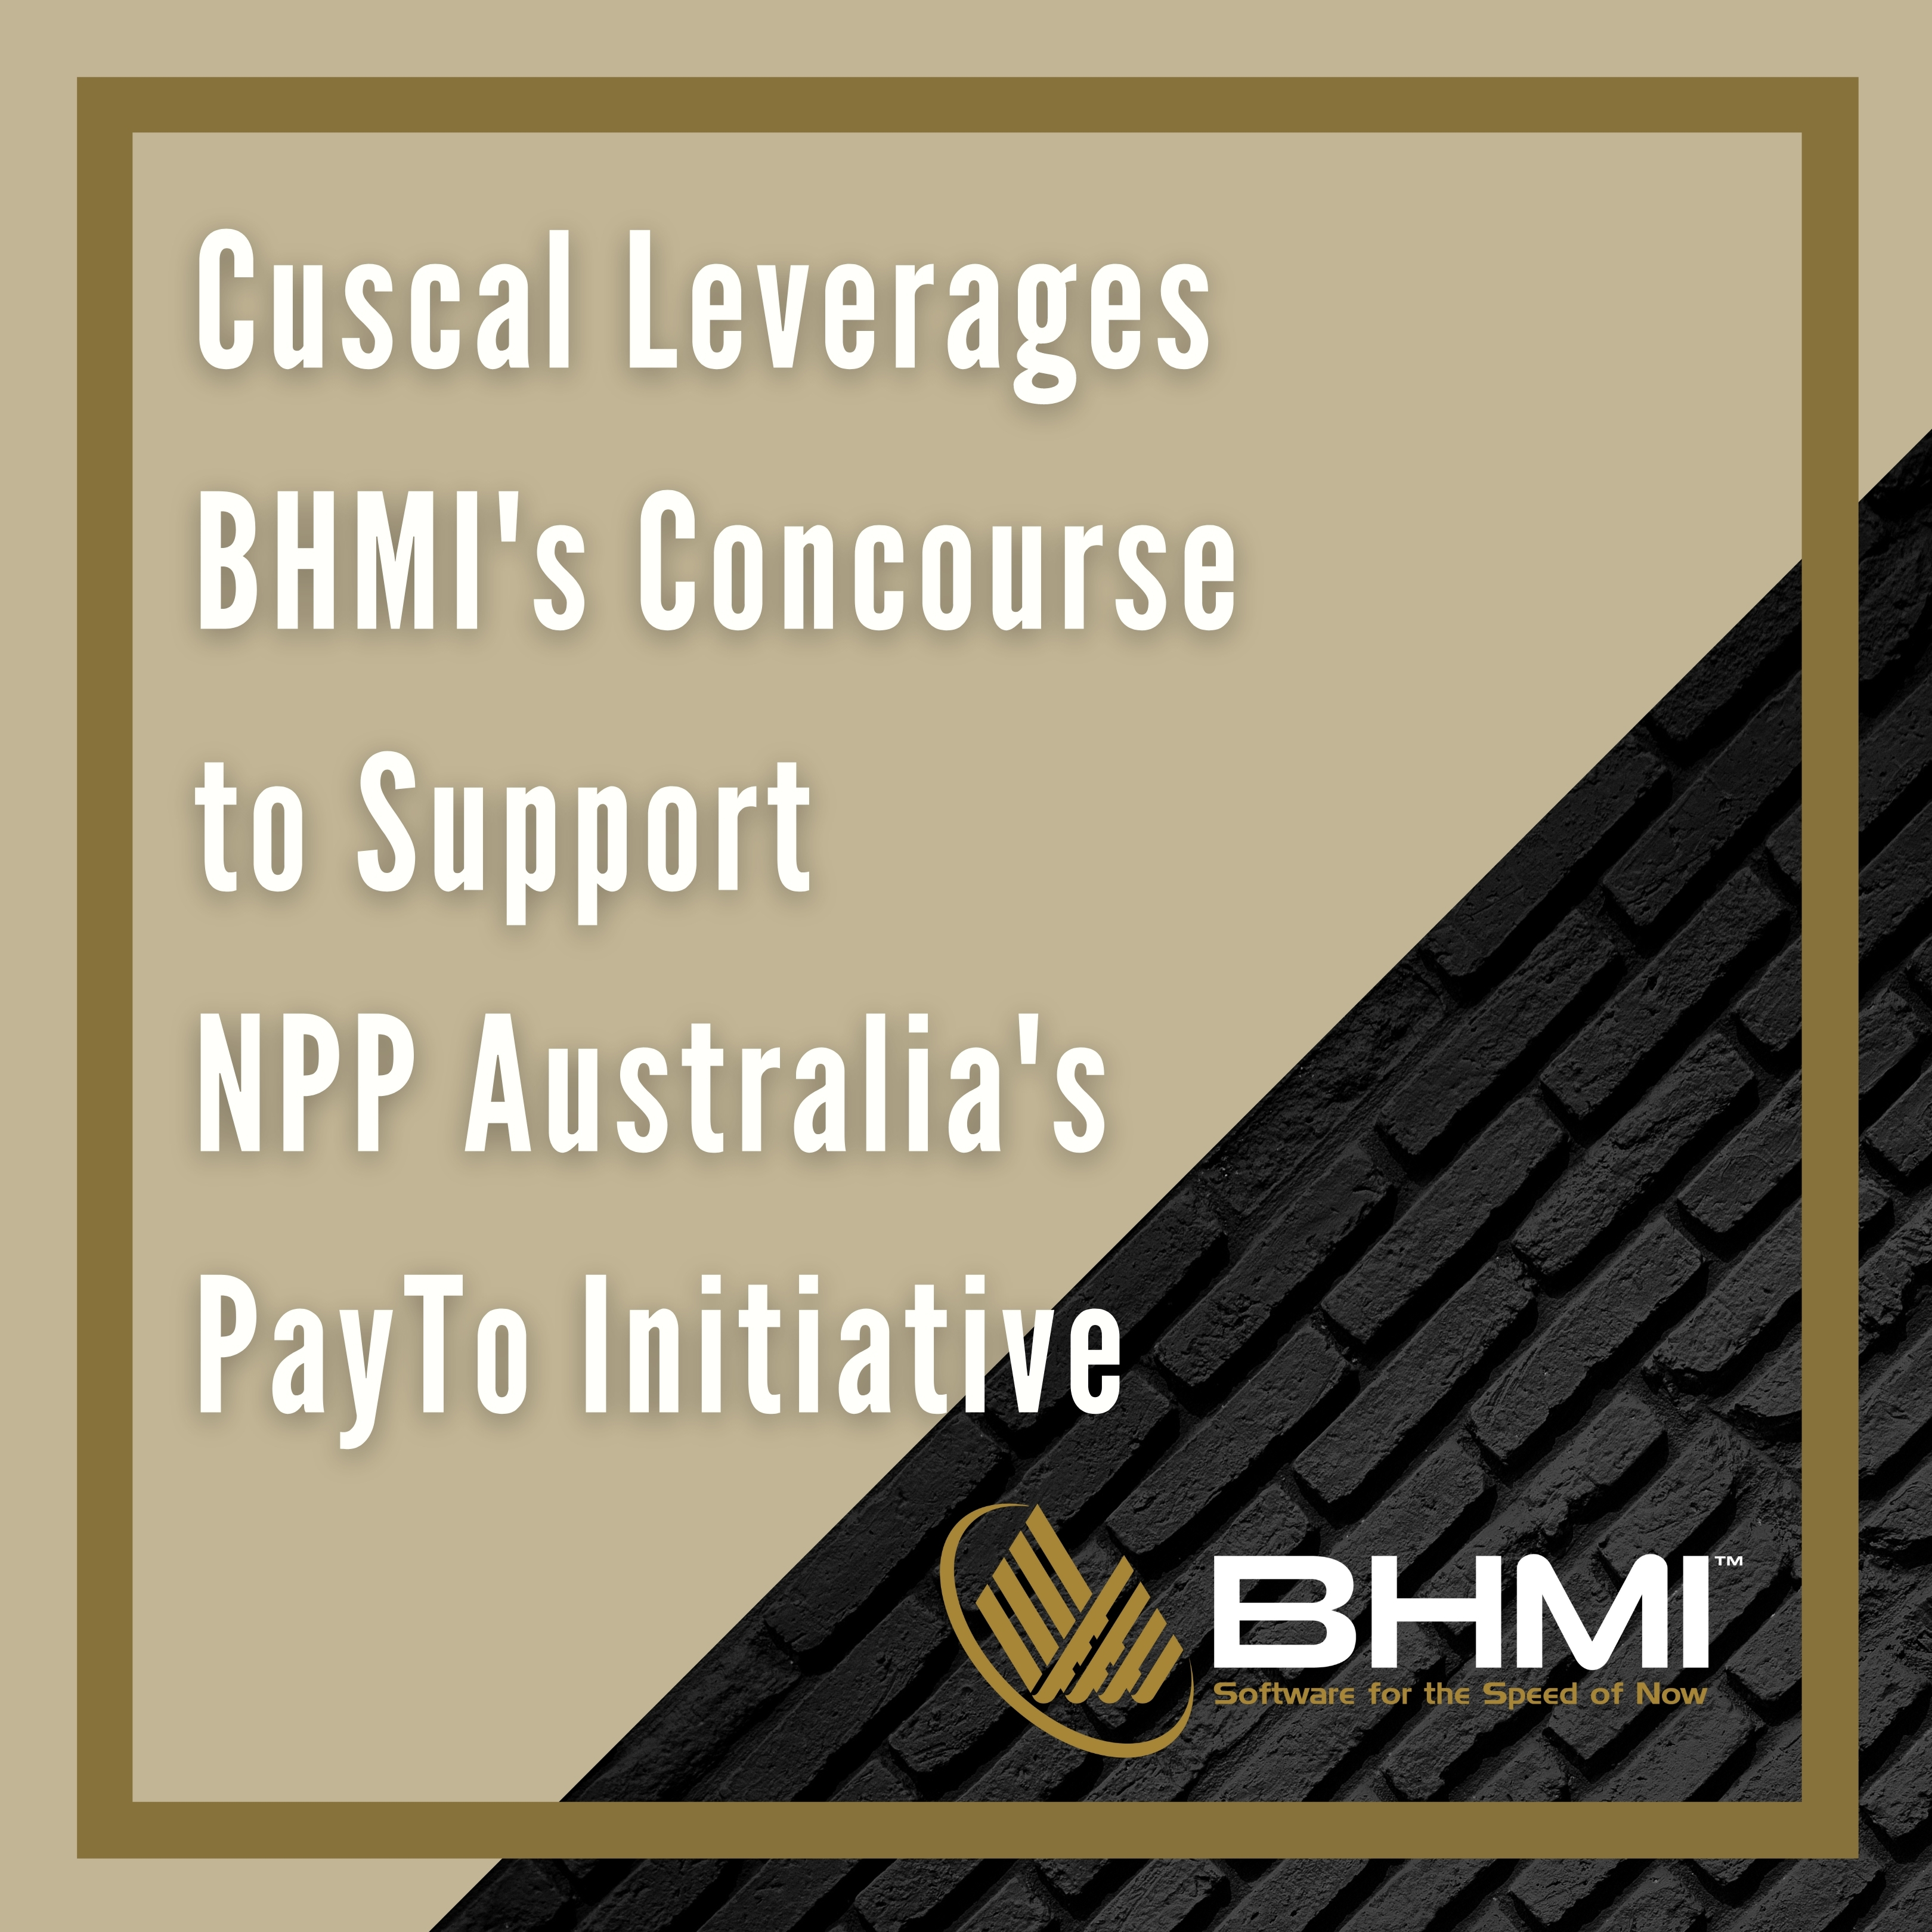 Cuscal Leverages BHMI’s Concourse to Support NPP Australia’s PayTo Initiative